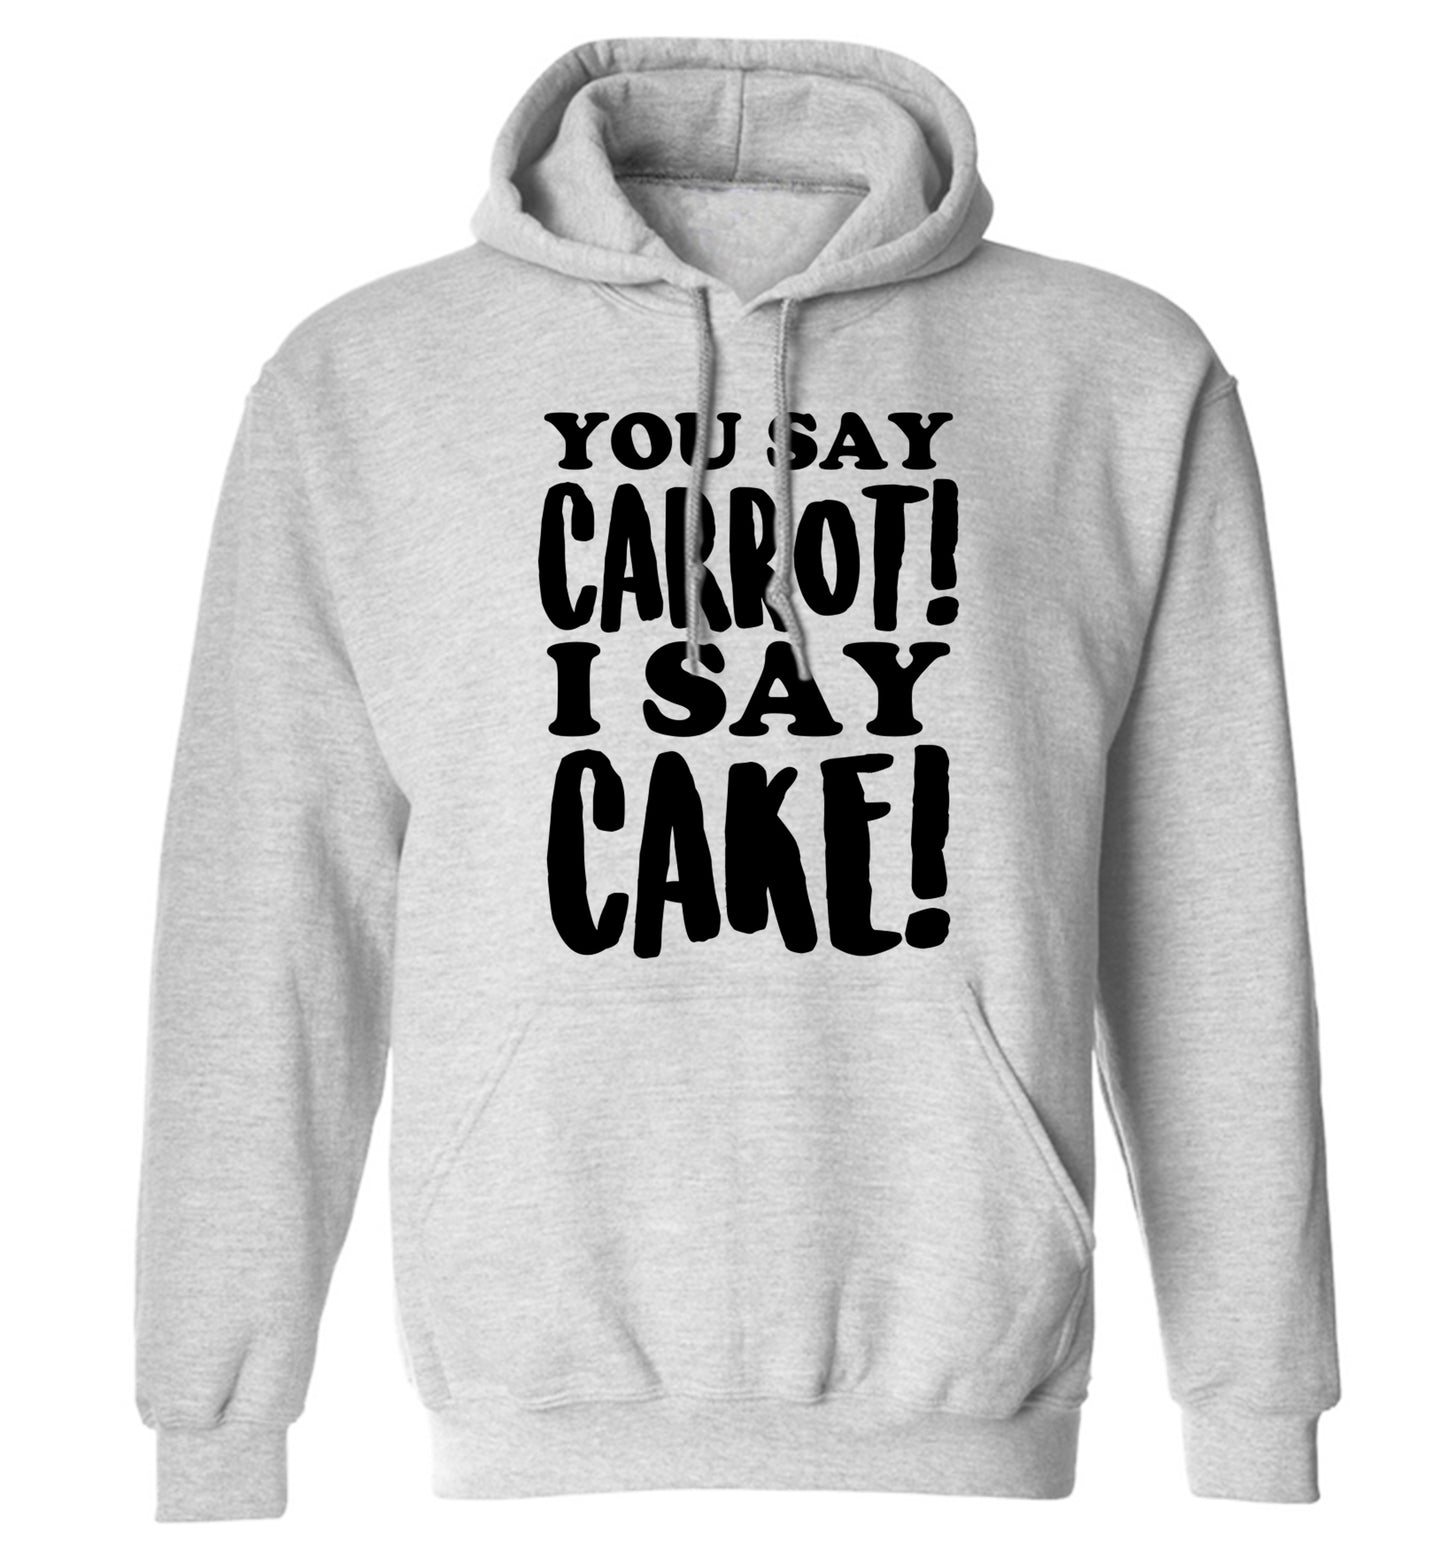 You say carrot I say cake! adults unisex grey hoodie 2XL